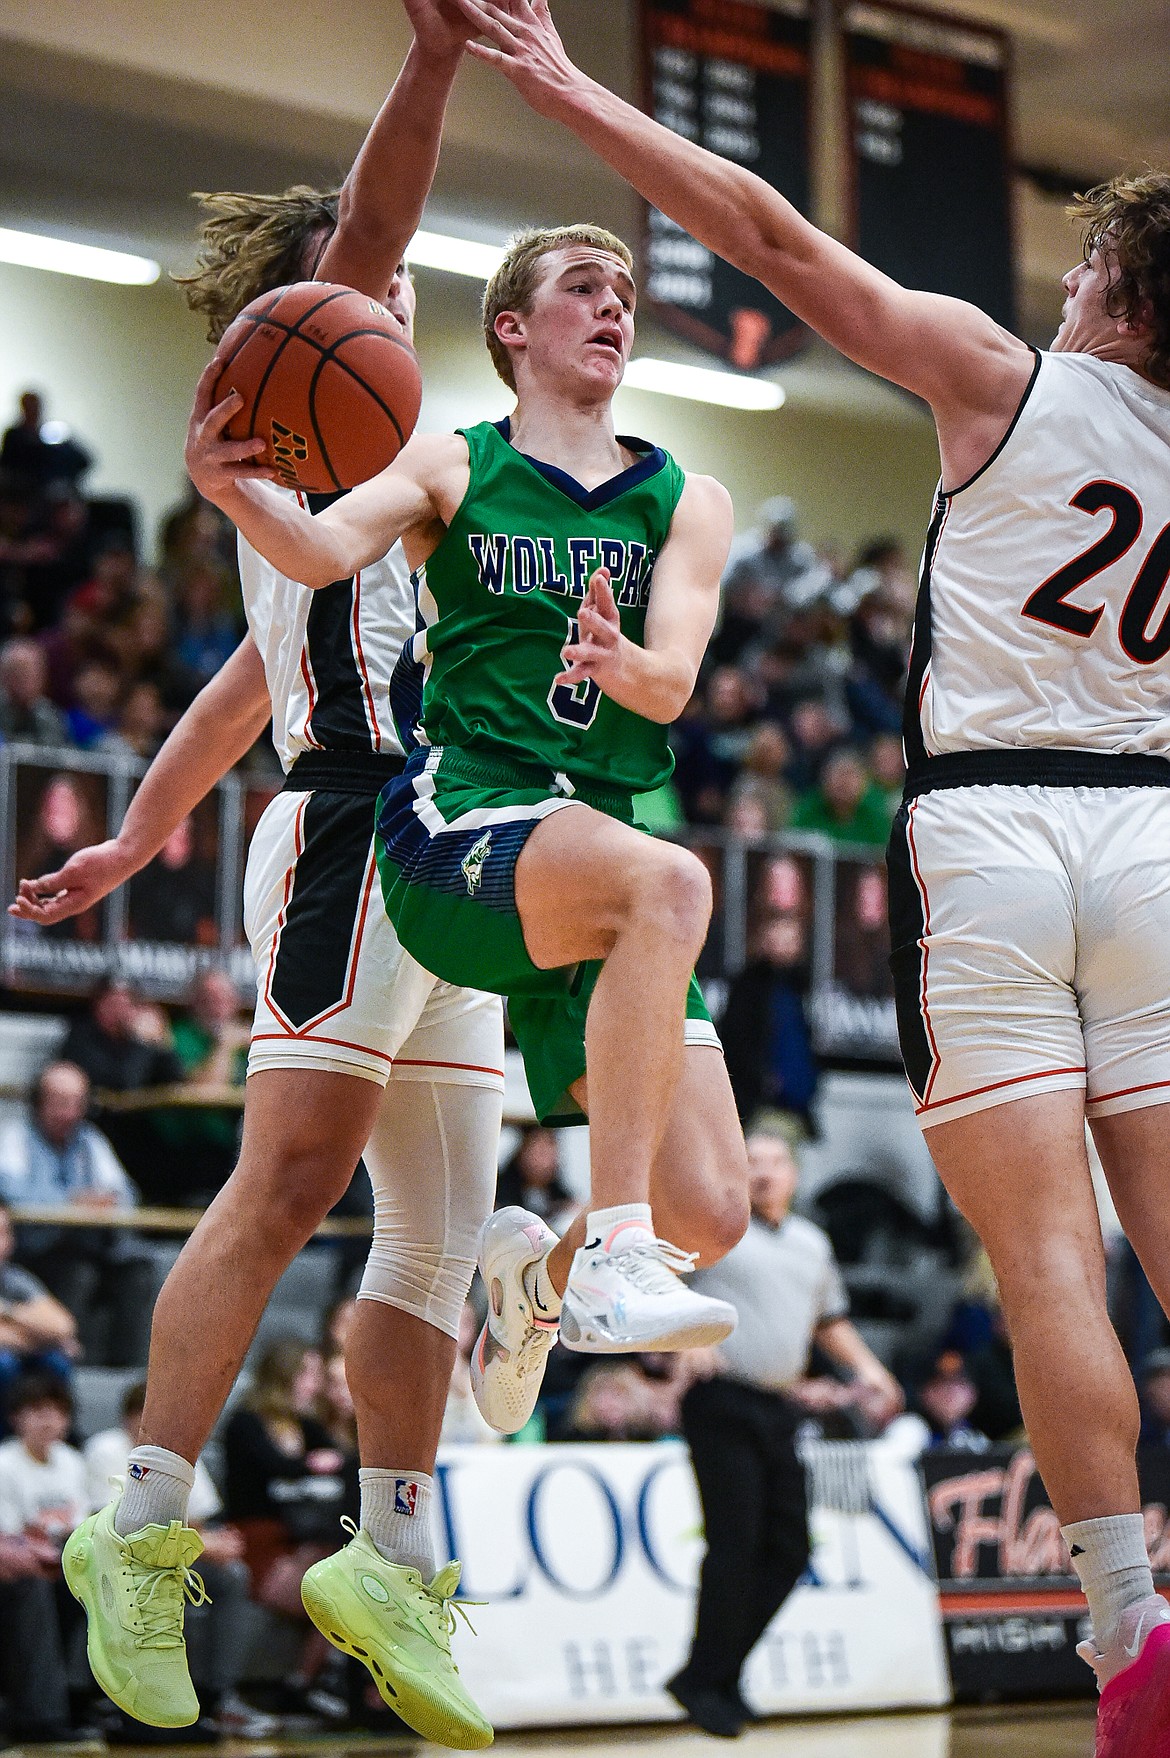 Glacier's Easton Kauffman (5) drives and dishes under the basket in the first half against Flathead at Flathead High School on Friday, Jan. 19. (Casey Kreider/Daily Inter Lake)